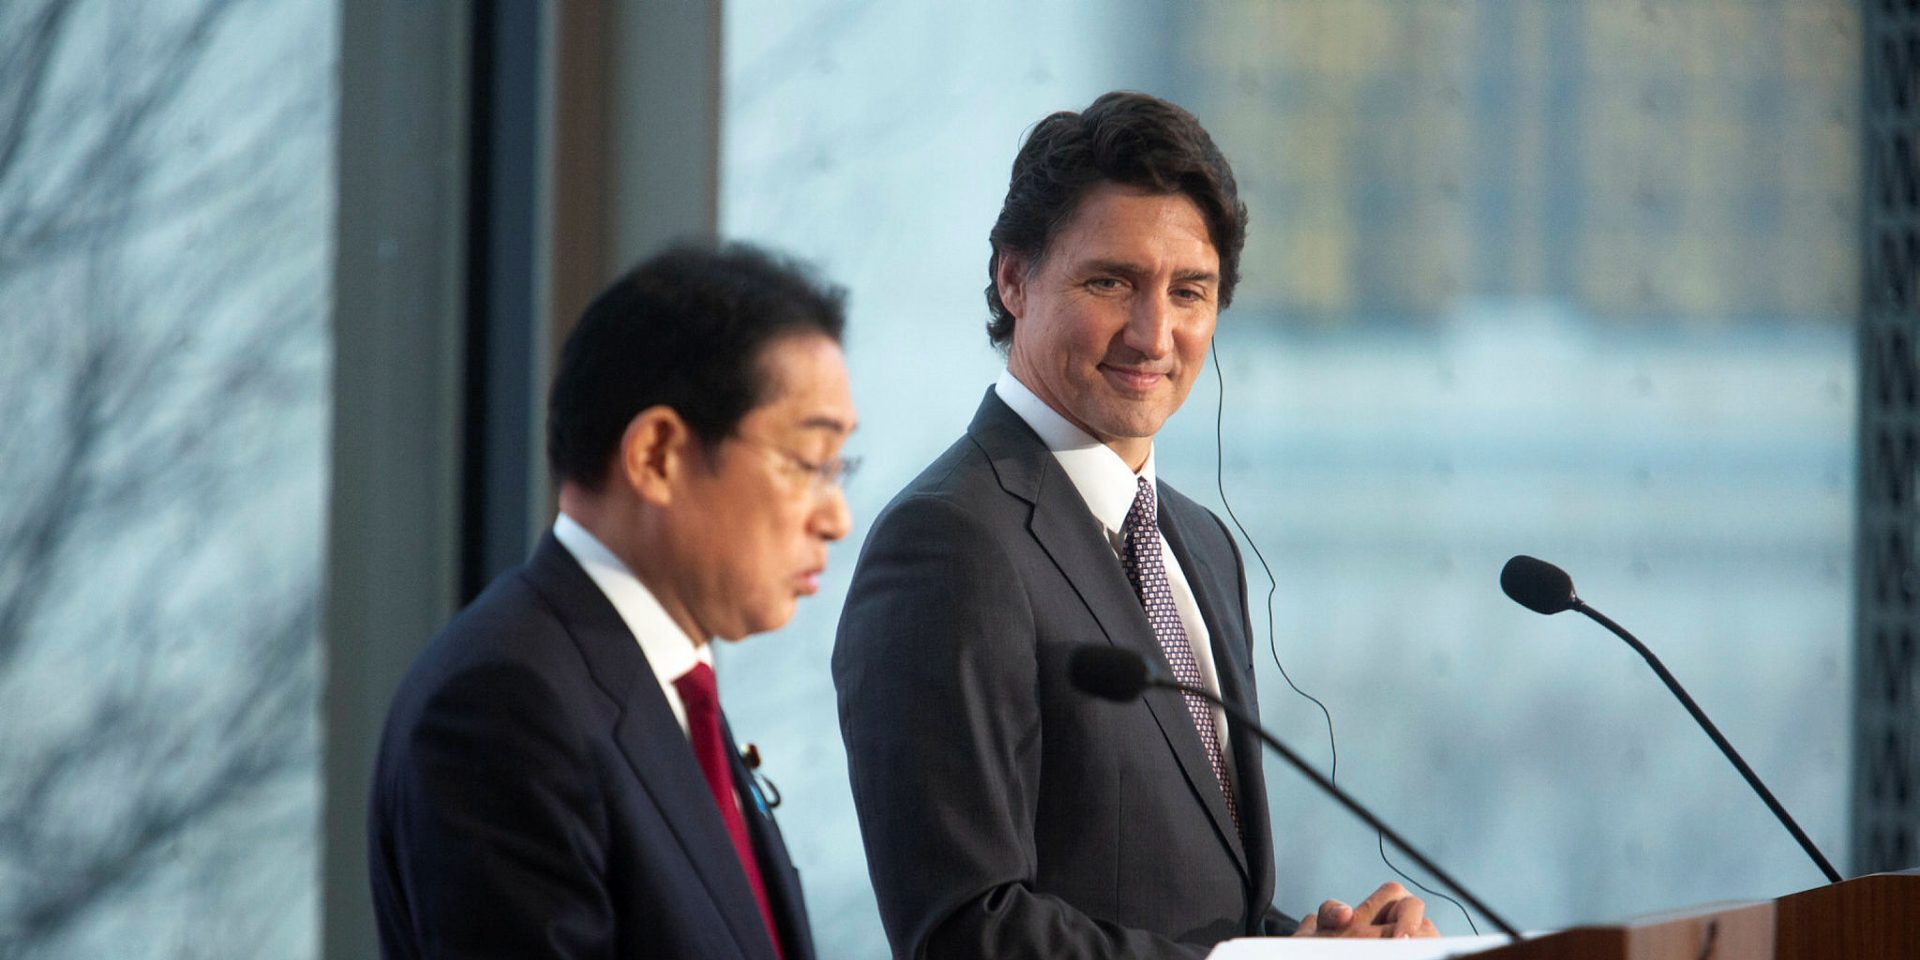 Prime Minister Justin Trudeau and  Japanese Prime Minister Kishida Fumio hold a joint media availability at the National Arts Centre in Ottawa on Jan. 12, 2023. The Hill Times photograph by Andrew Meade